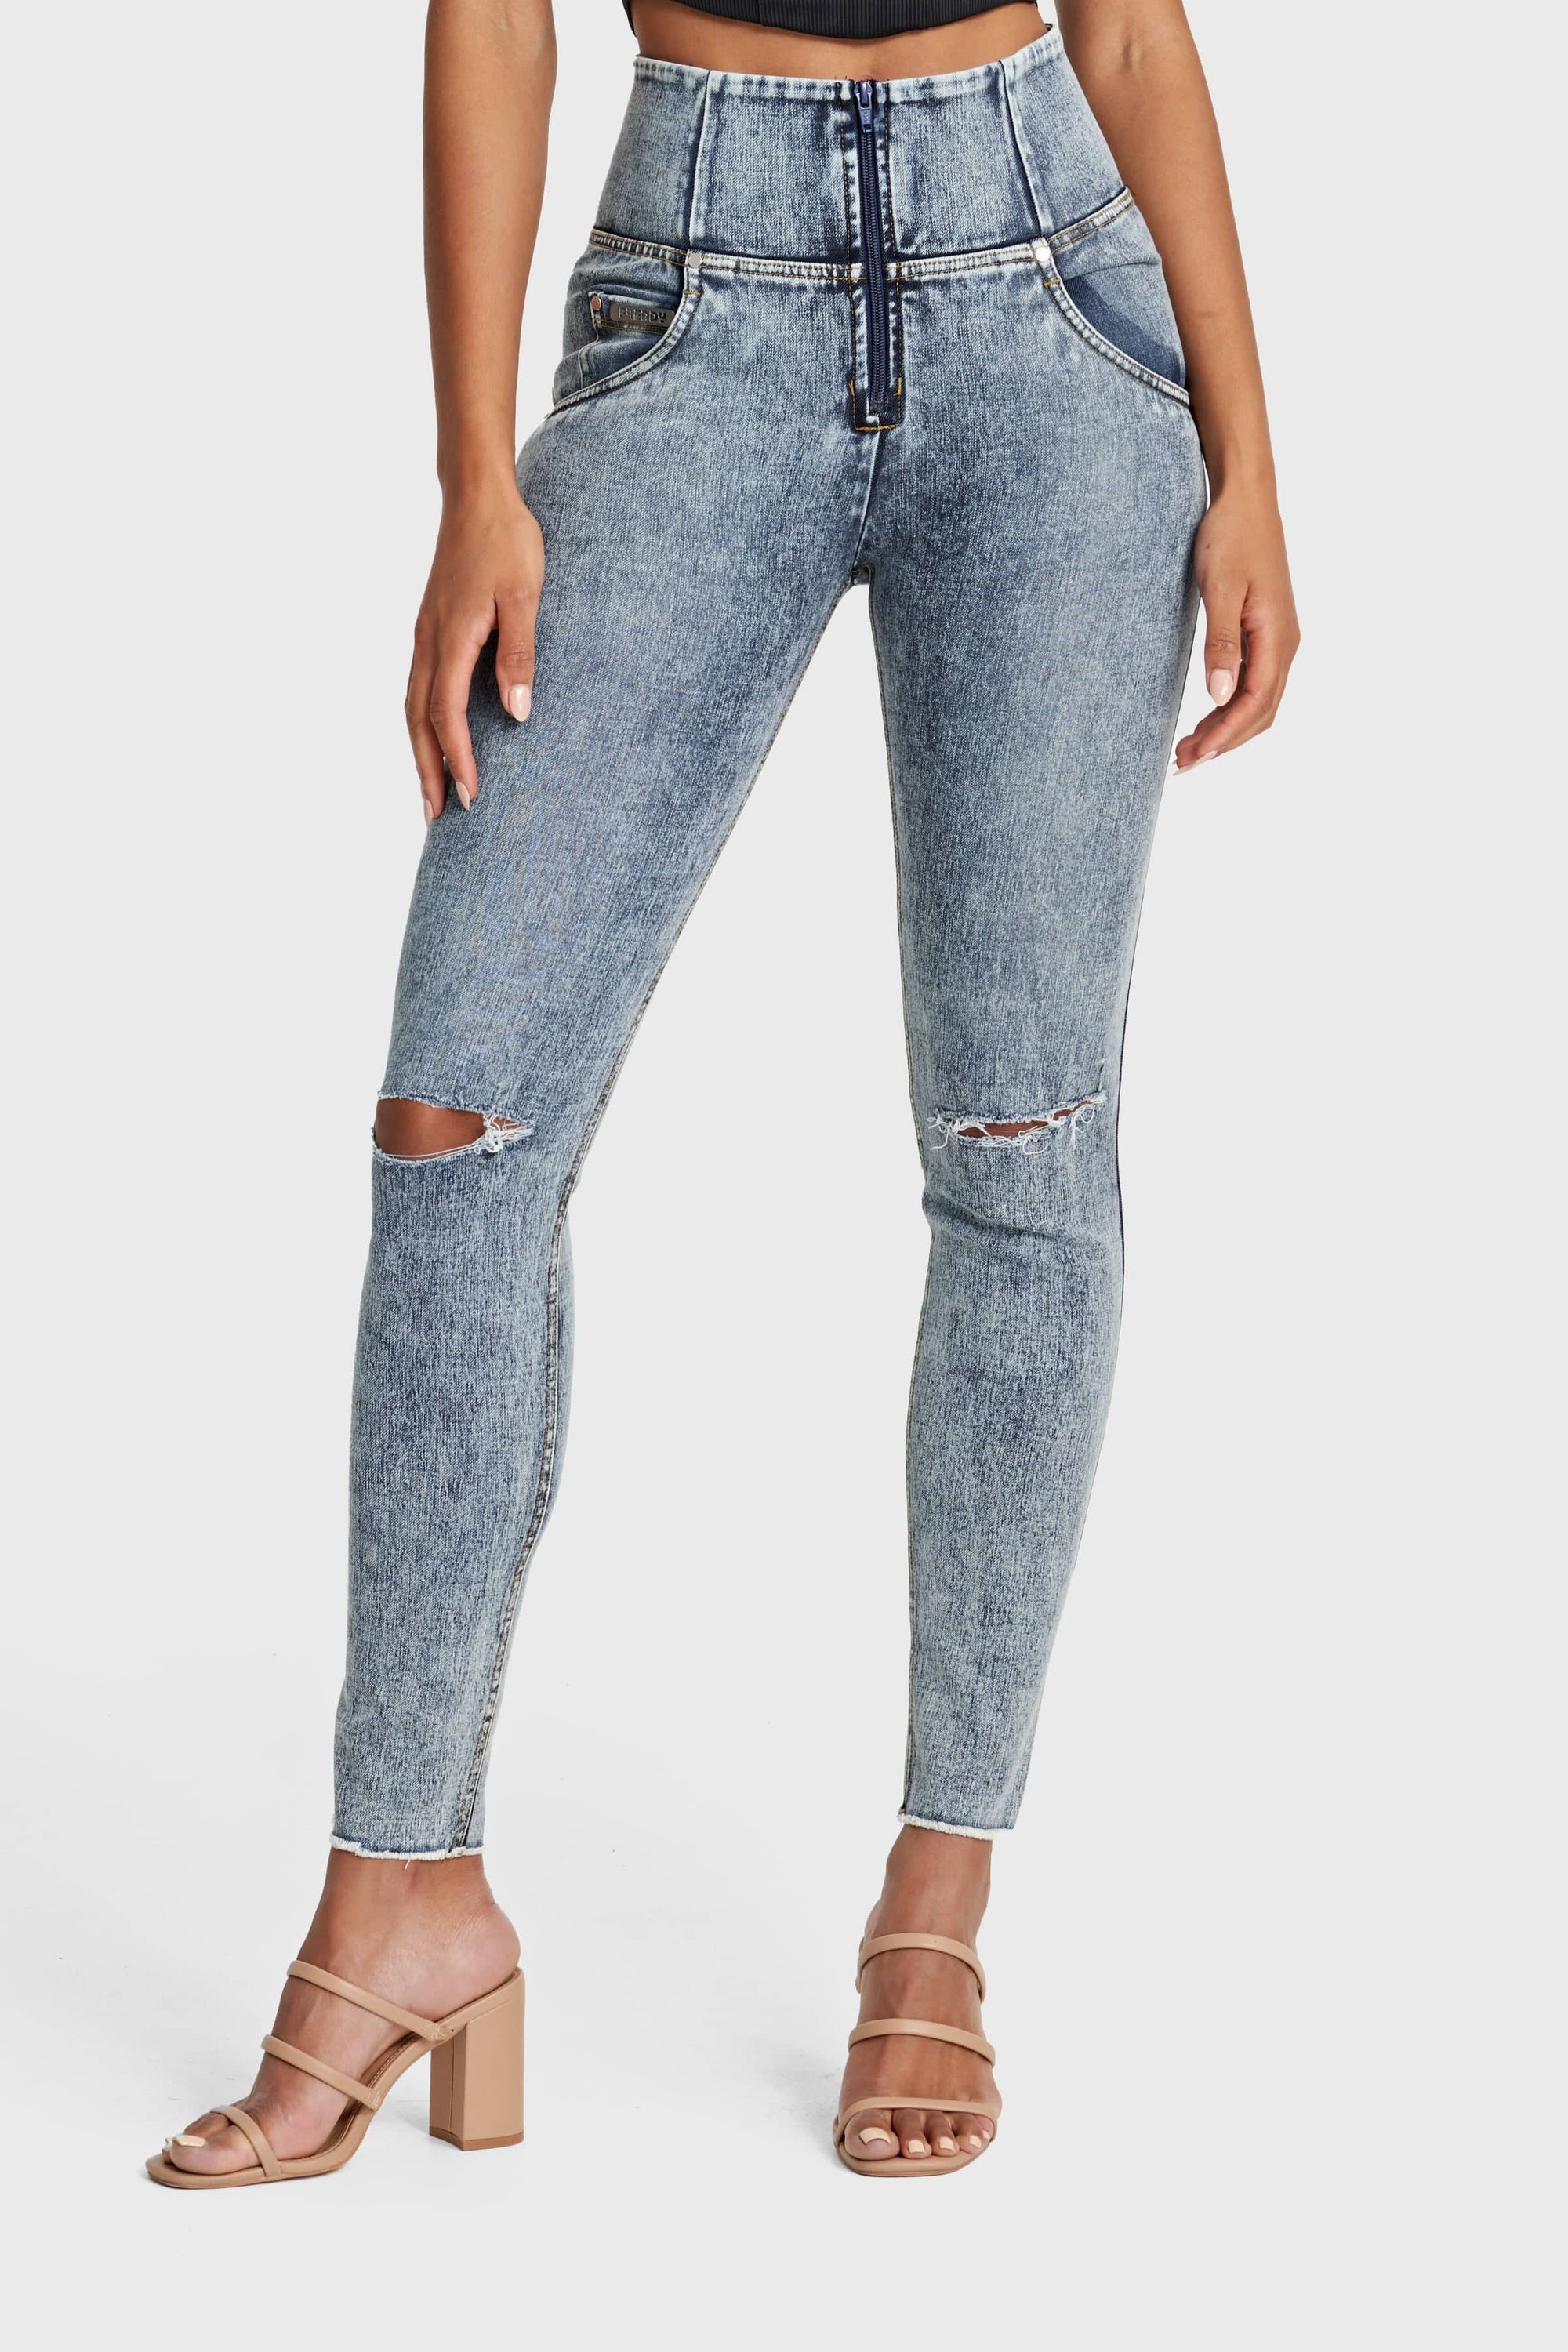 WR.UP® Snug Ripped Jeans - High Waisted - Full Length - Blue Stonewash + Yellow Stitching 1